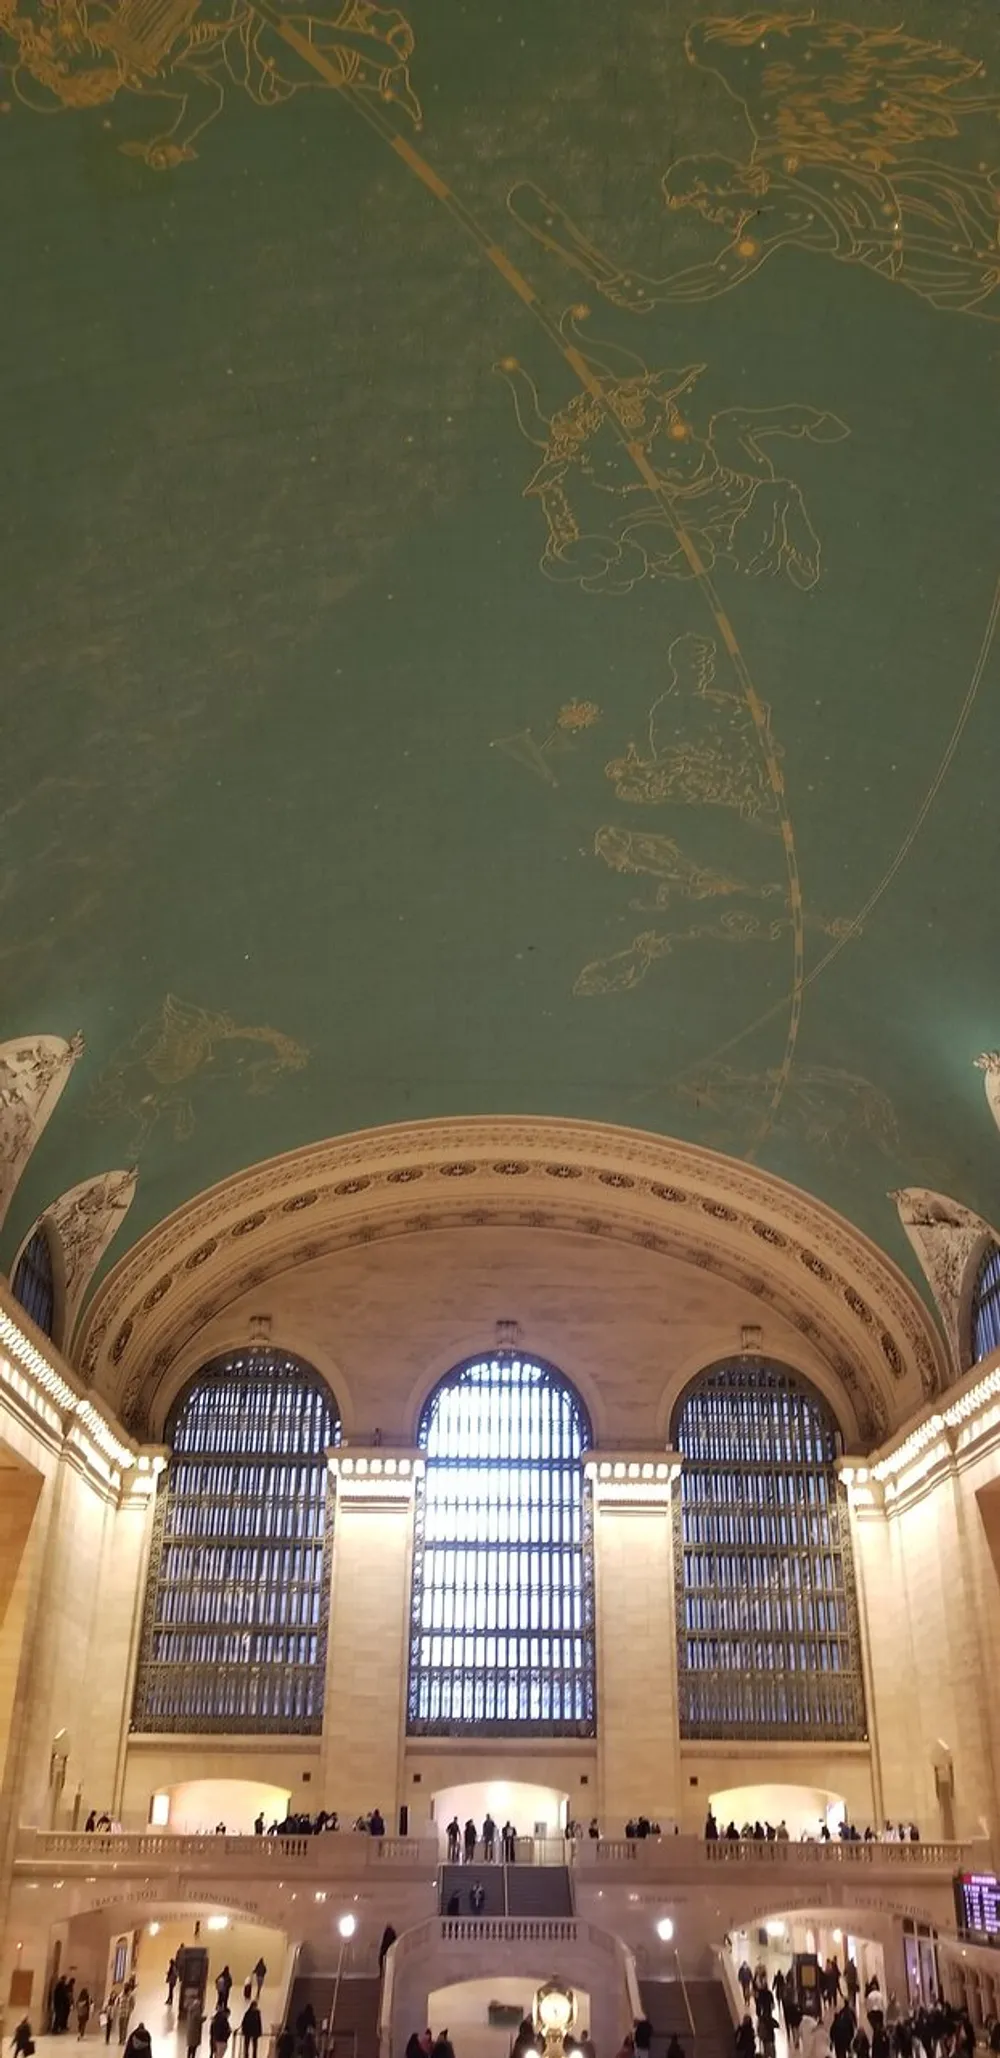 The image shows the interior of Grand Central Terminal in New York City with its spacious main concourse large arched windows and the iconic celestial ceiling mural